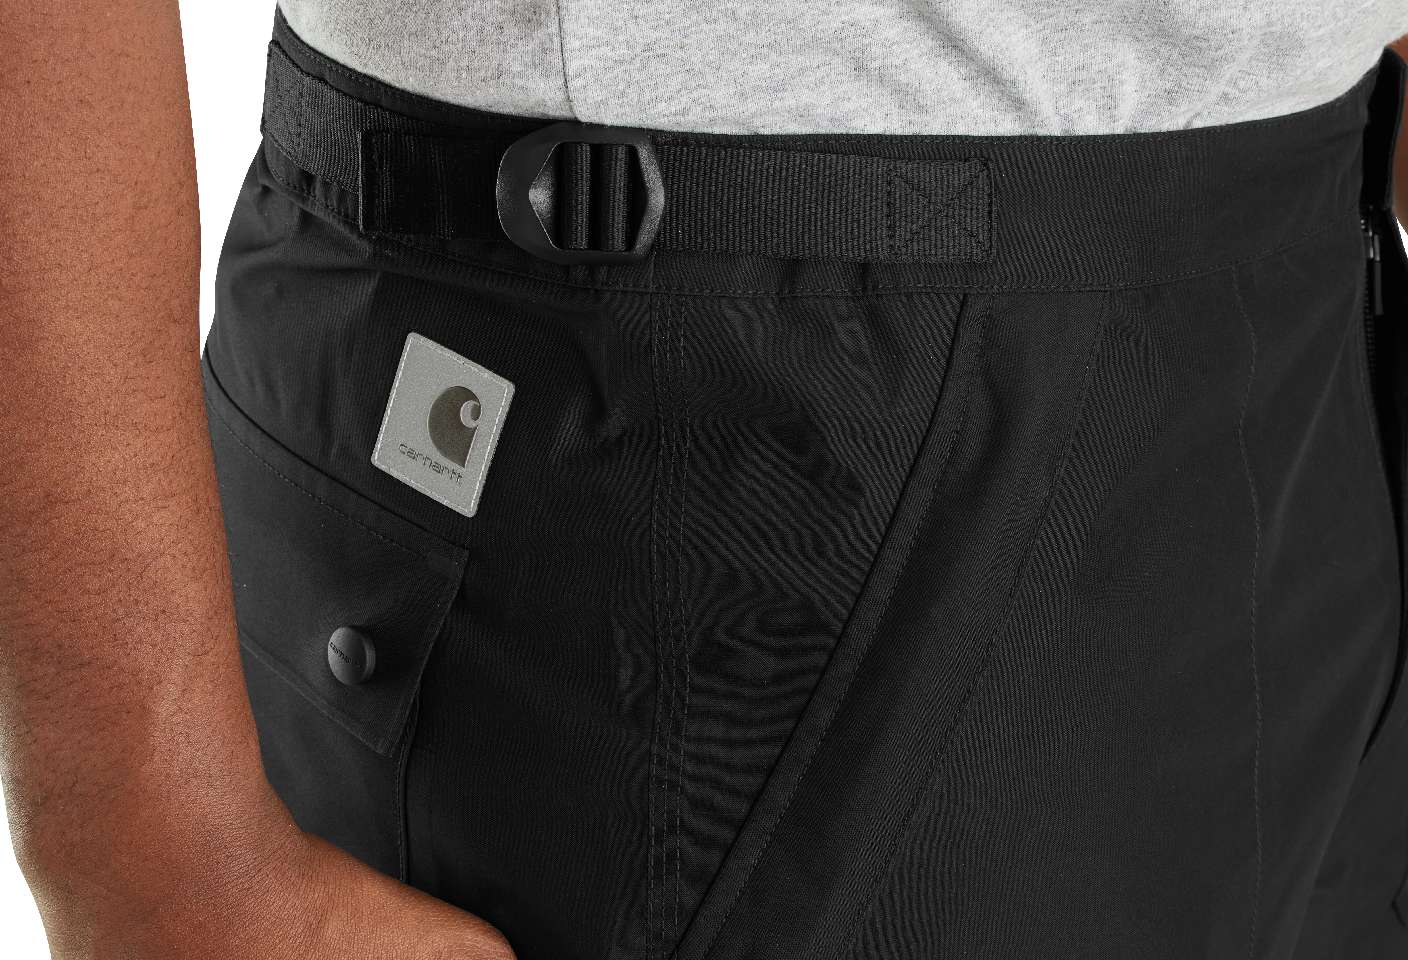 Adjustable waist for a comfortable fit